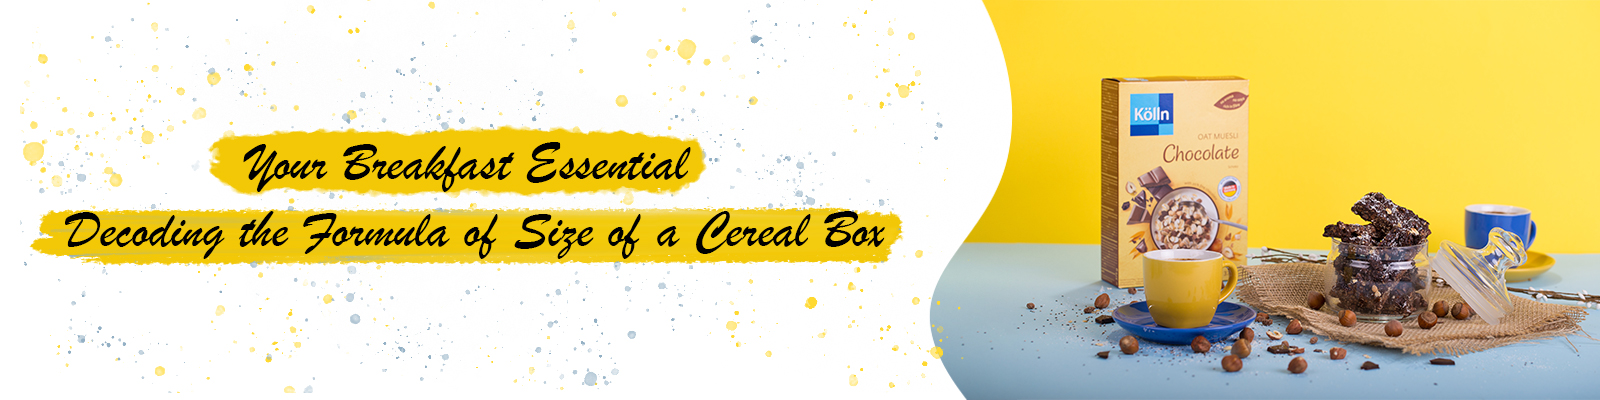 Your Breakfast Essential: Decoding the Formula of Size of a Cereal Box